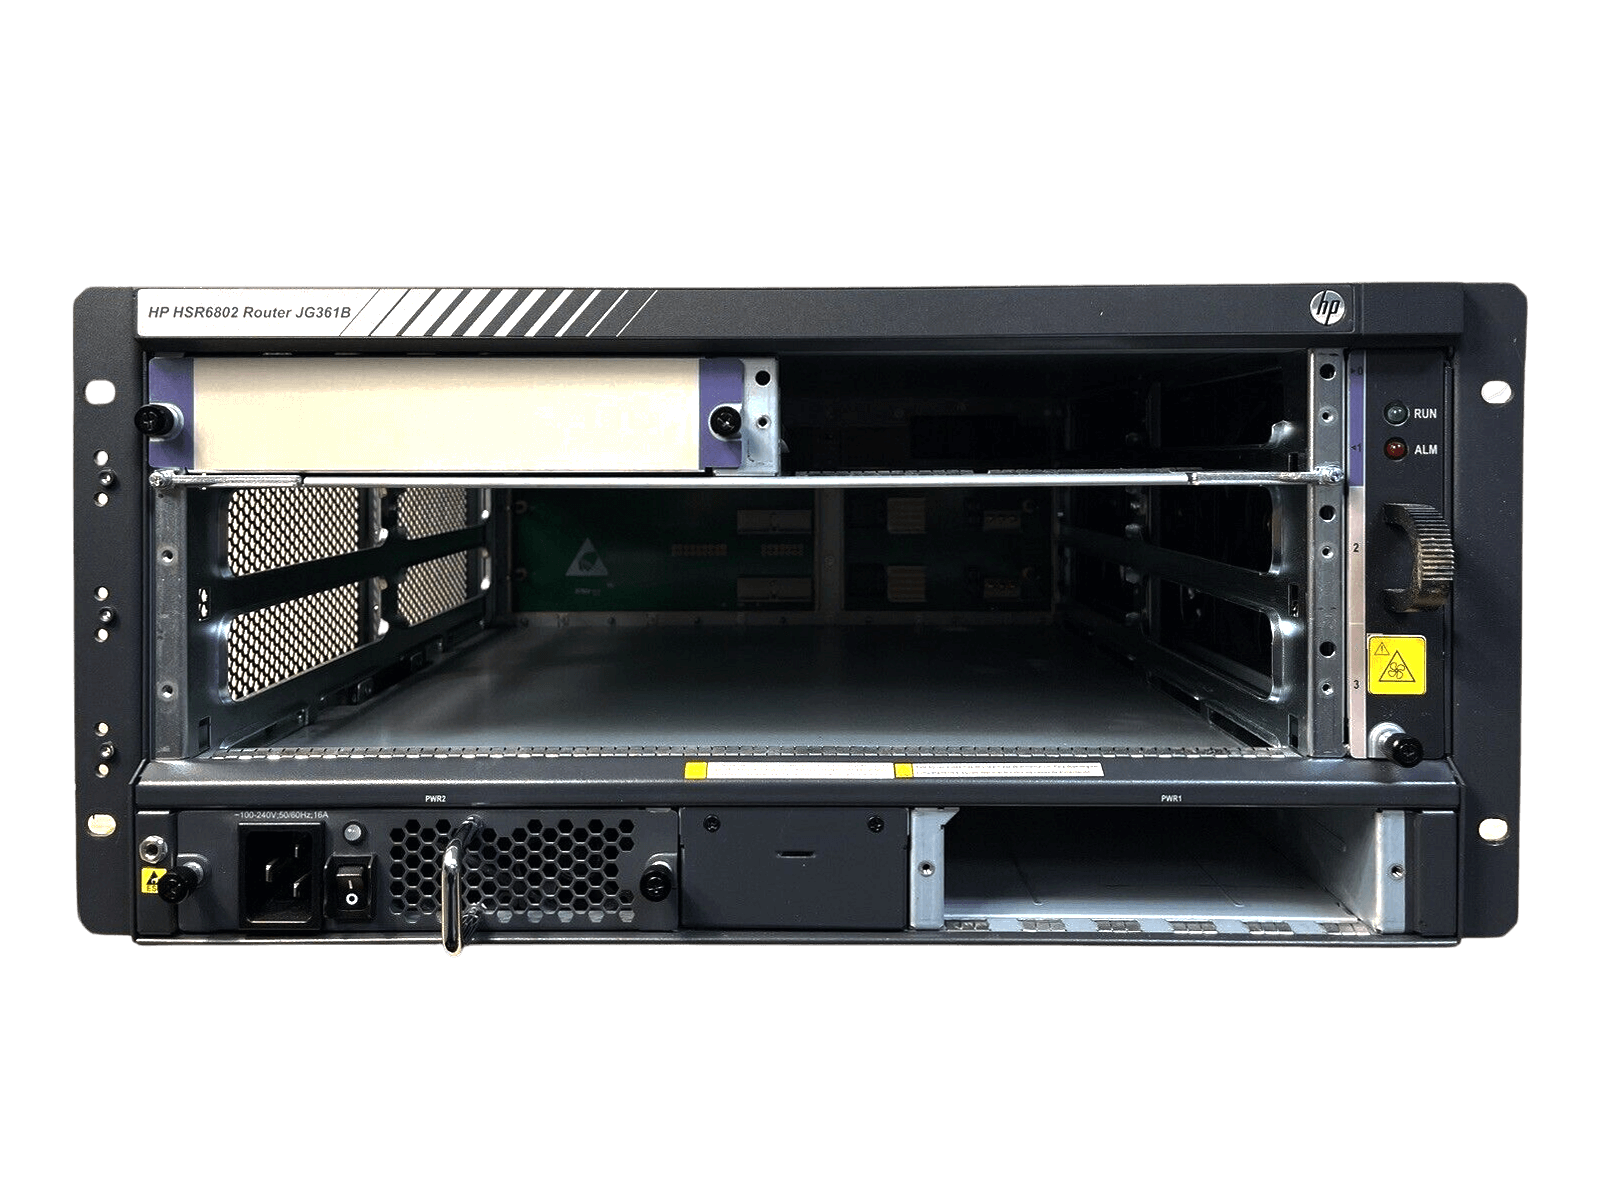 HPE JG362A FlexNetwork HSR6802 Router Chassis with 1x AC 1200W PSU JG335A.